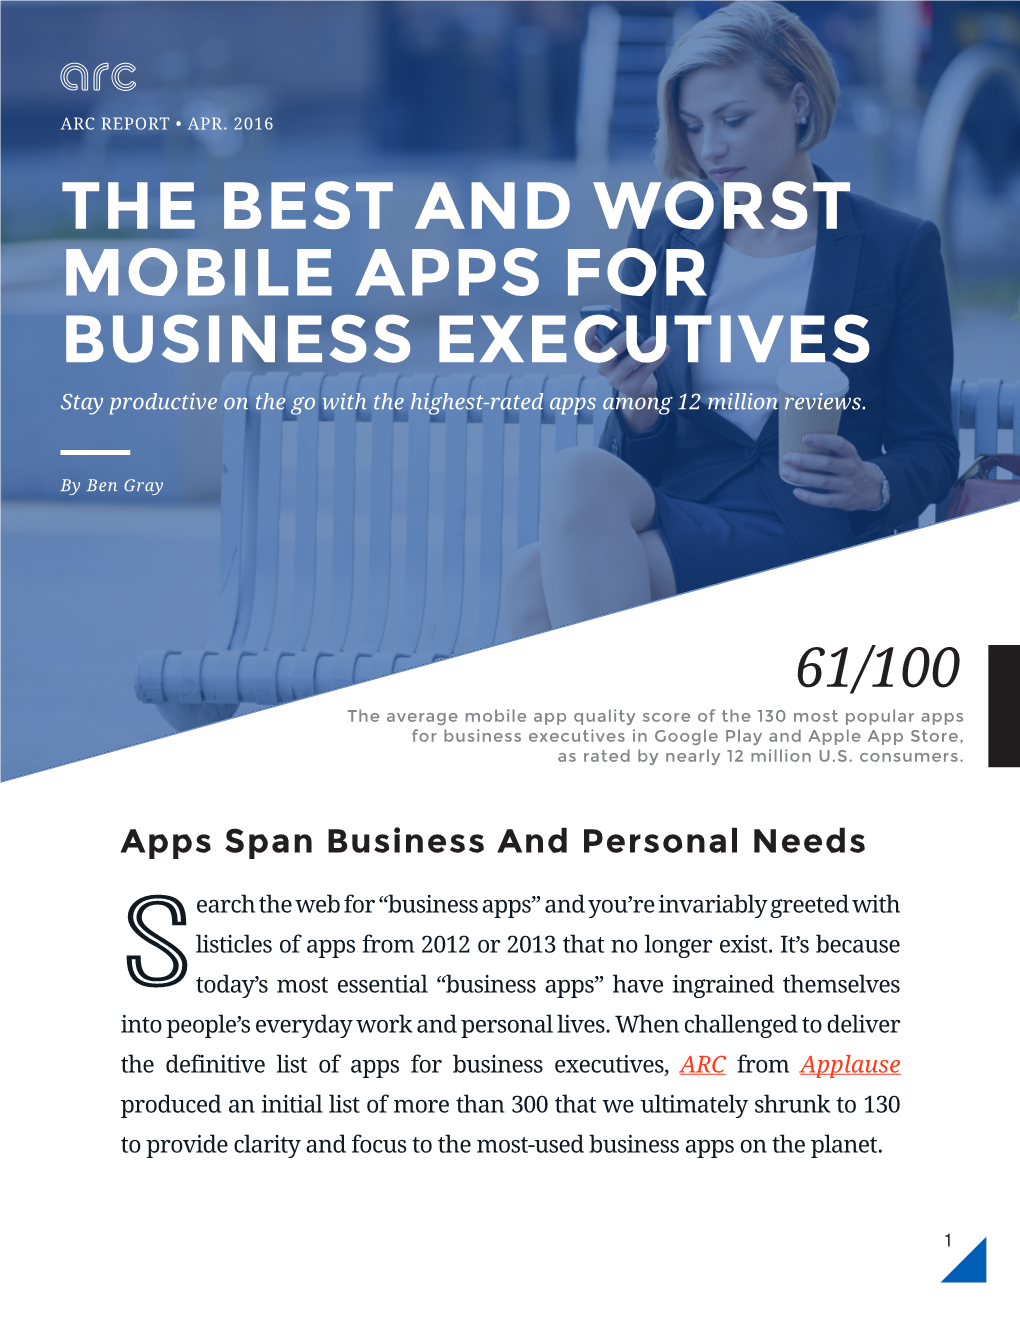 THE BEST and WORST MOBILE APPS for BUSINESS EXECUTIVES Stay Productive on the Go with the Highest-Rated Apps Among 12 Million Reviews